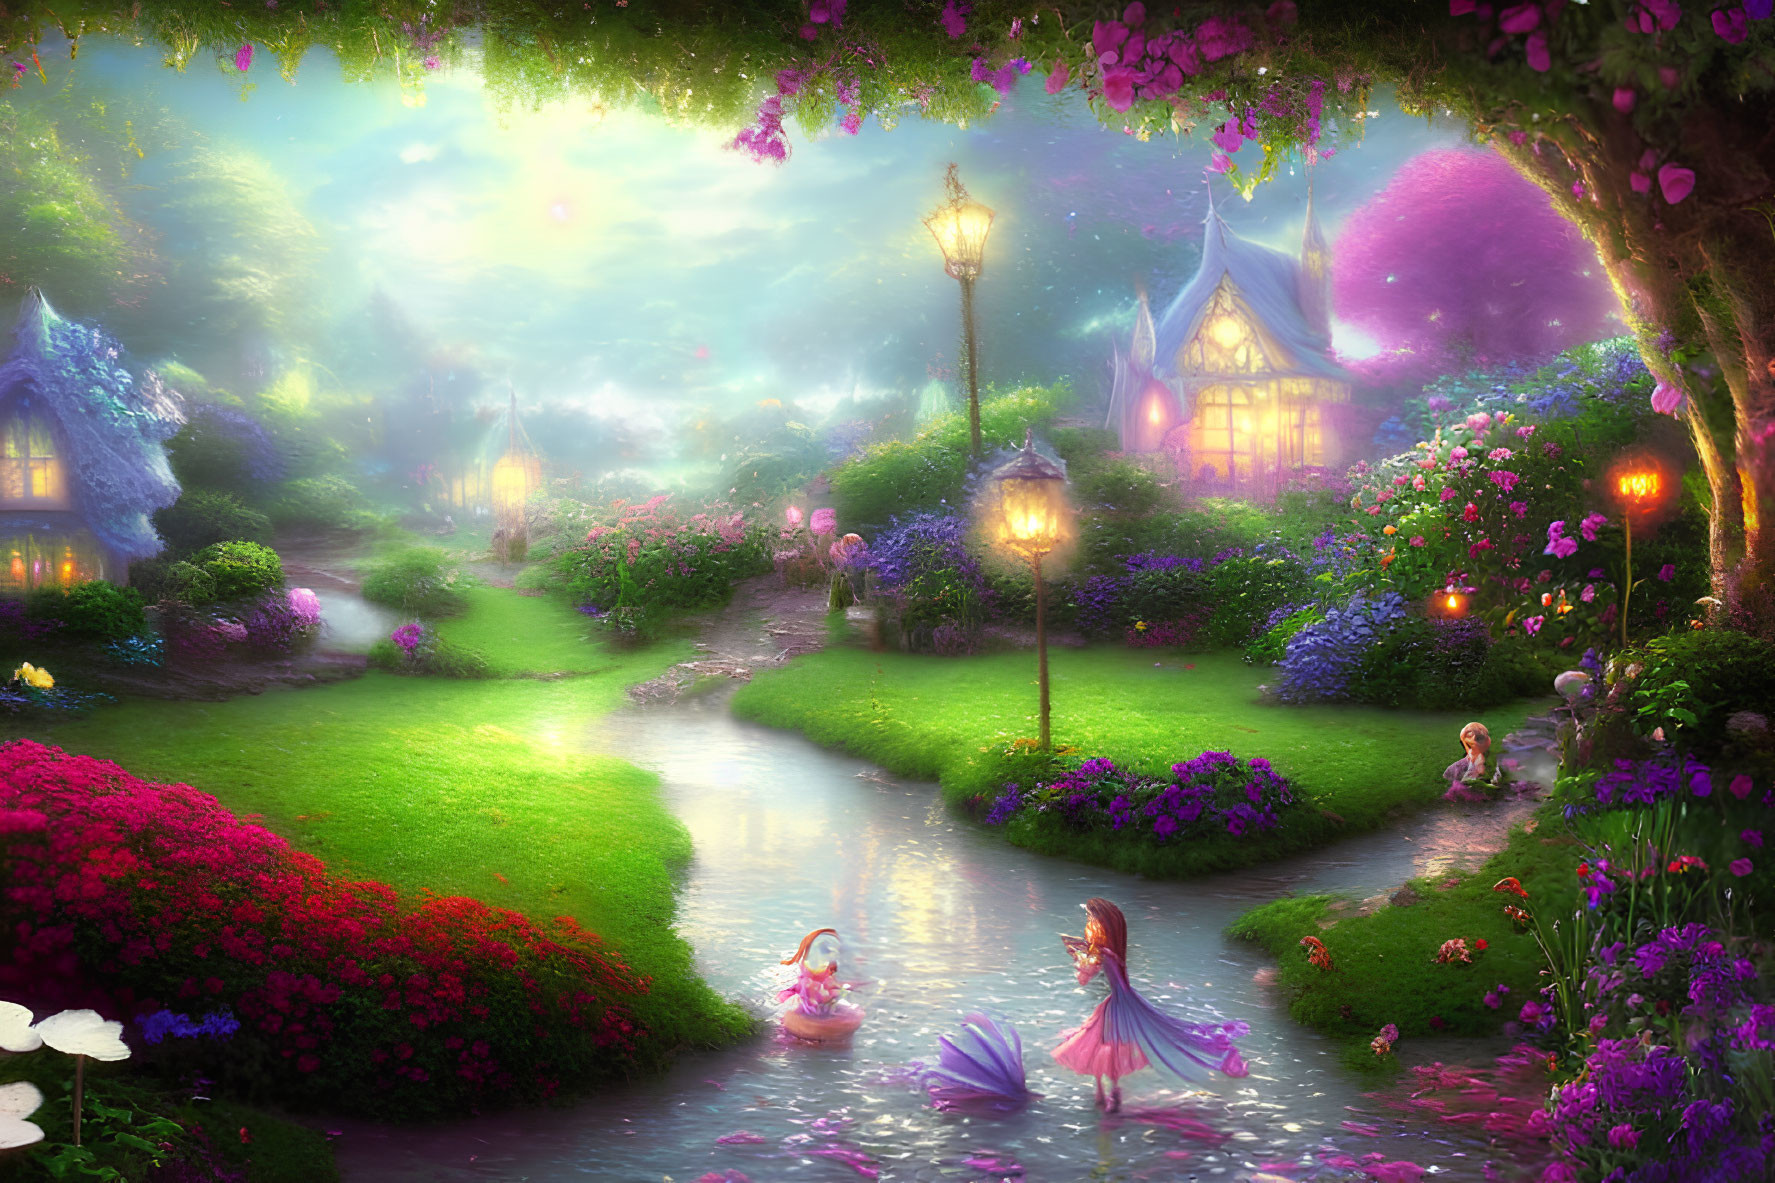 Colorful garden with lanterns, cottages, stream, and ethereal figures among flowers